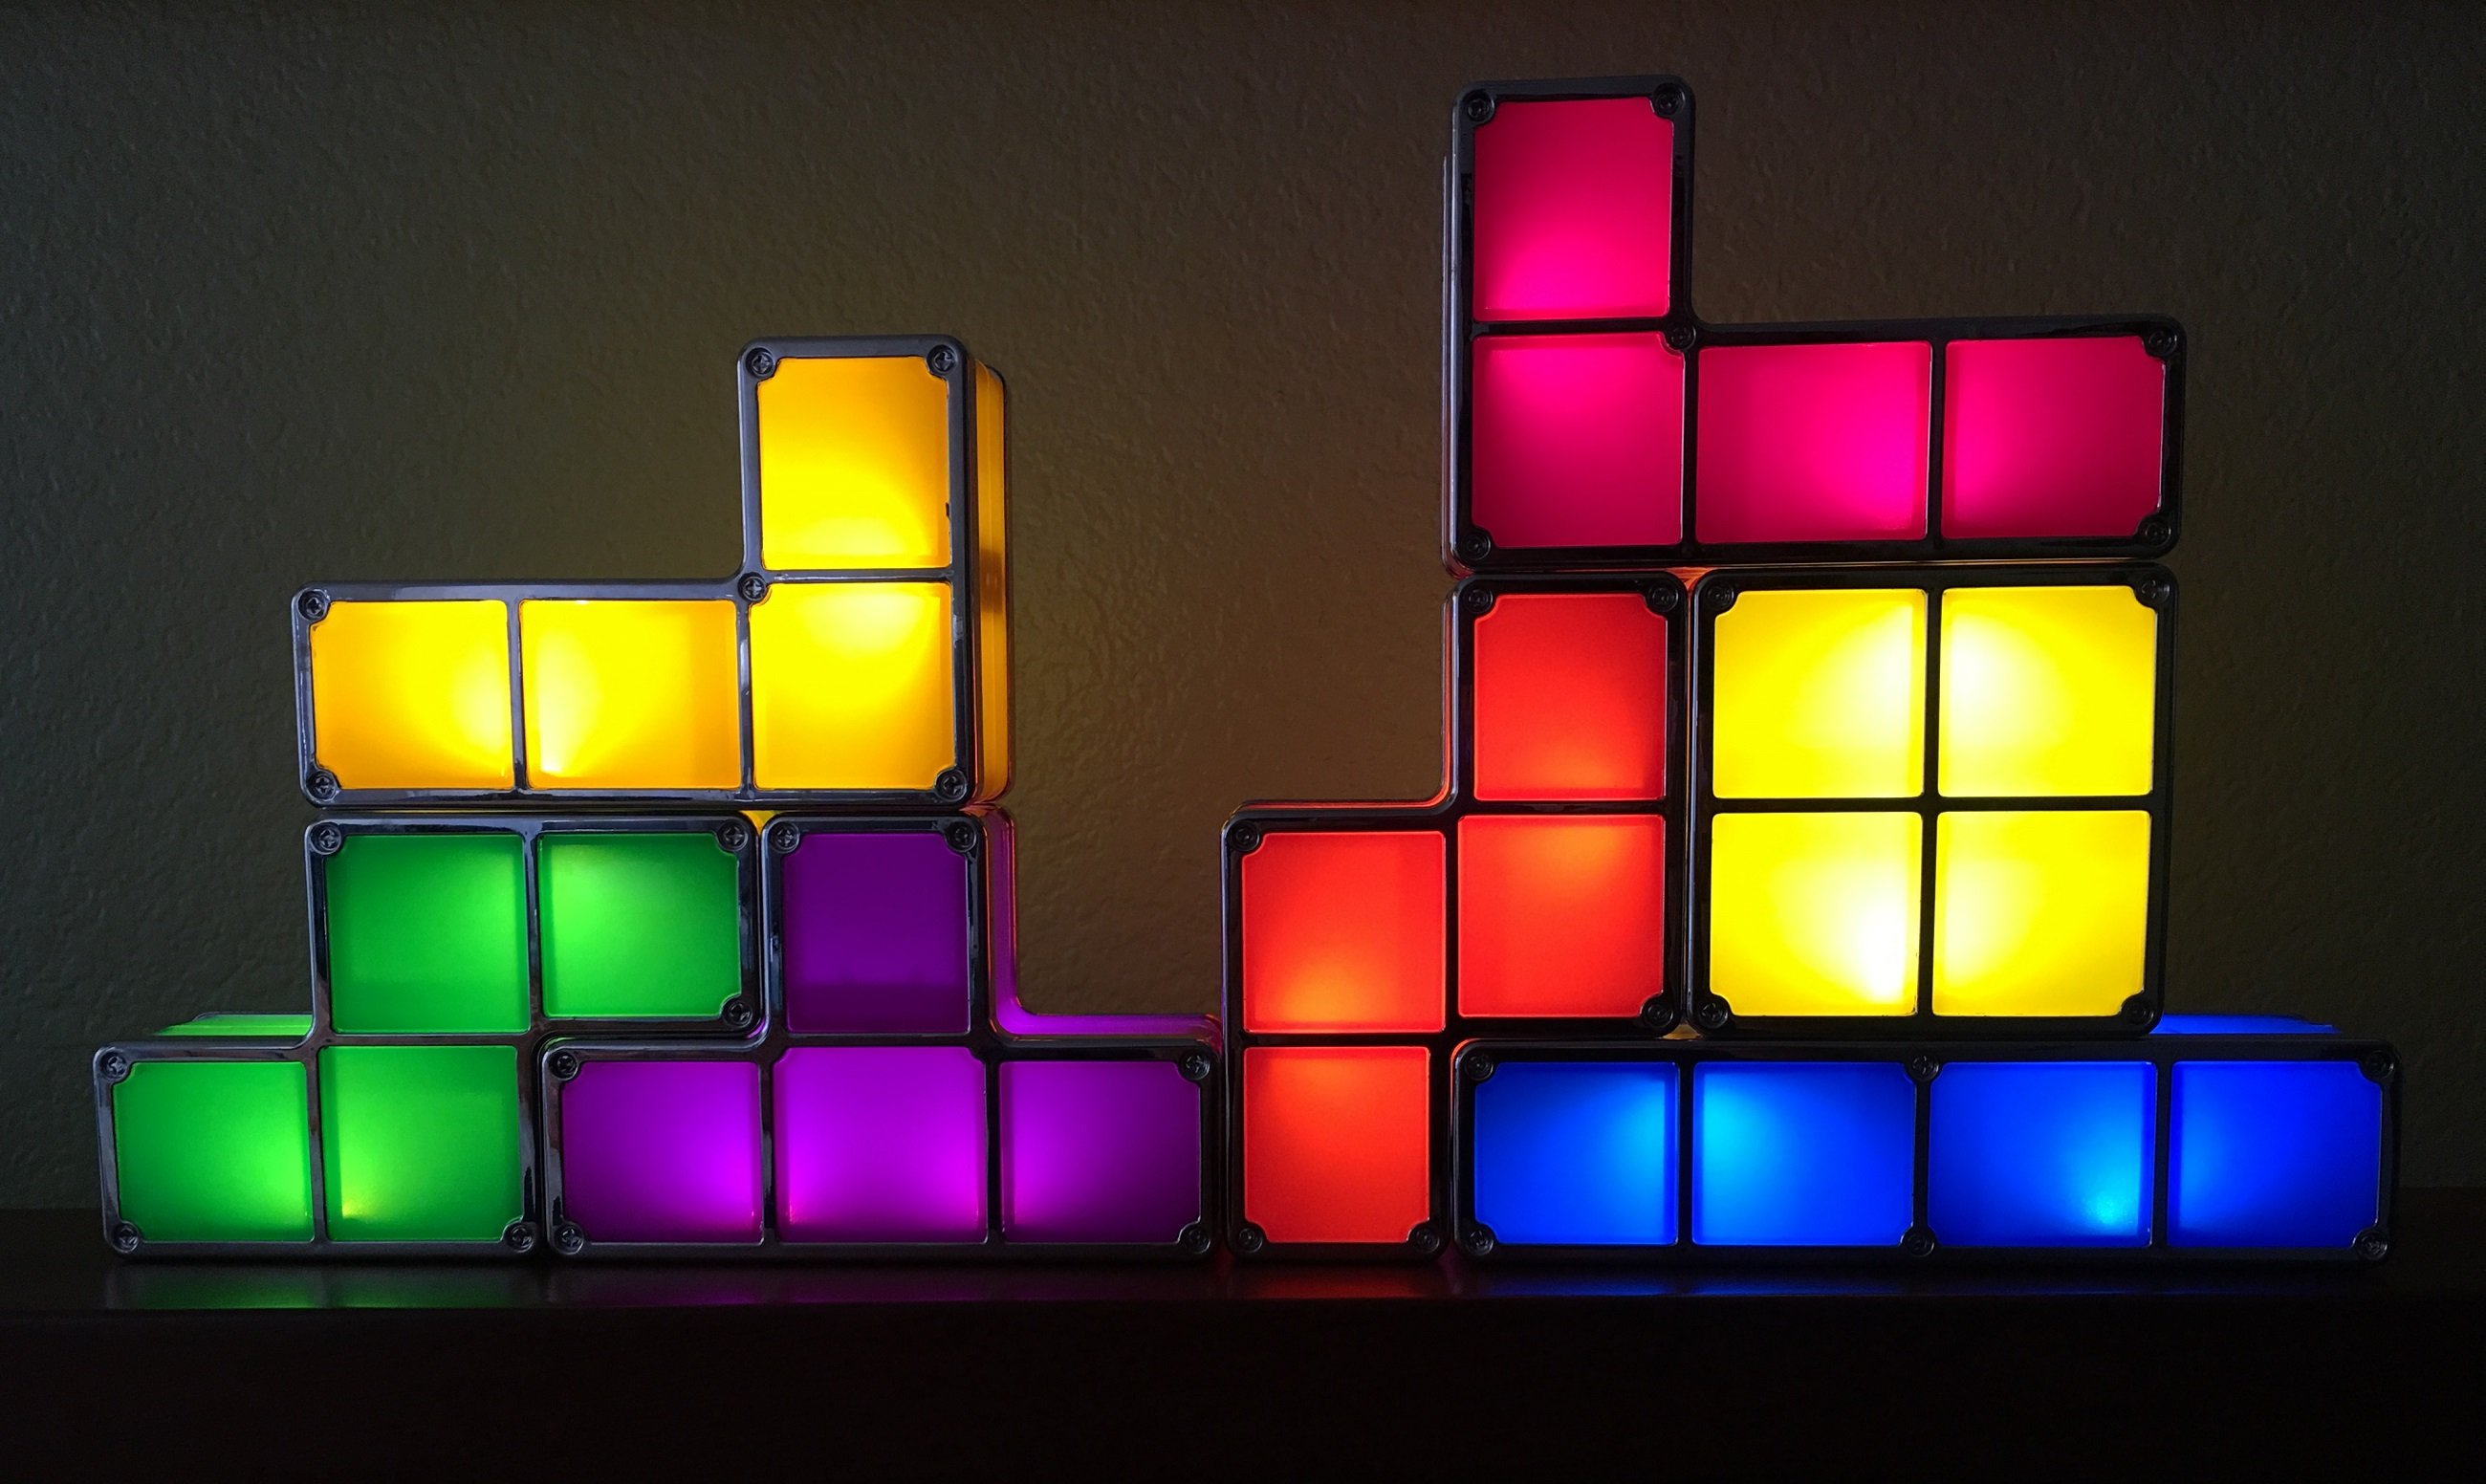 The Life Lessons of Tetris